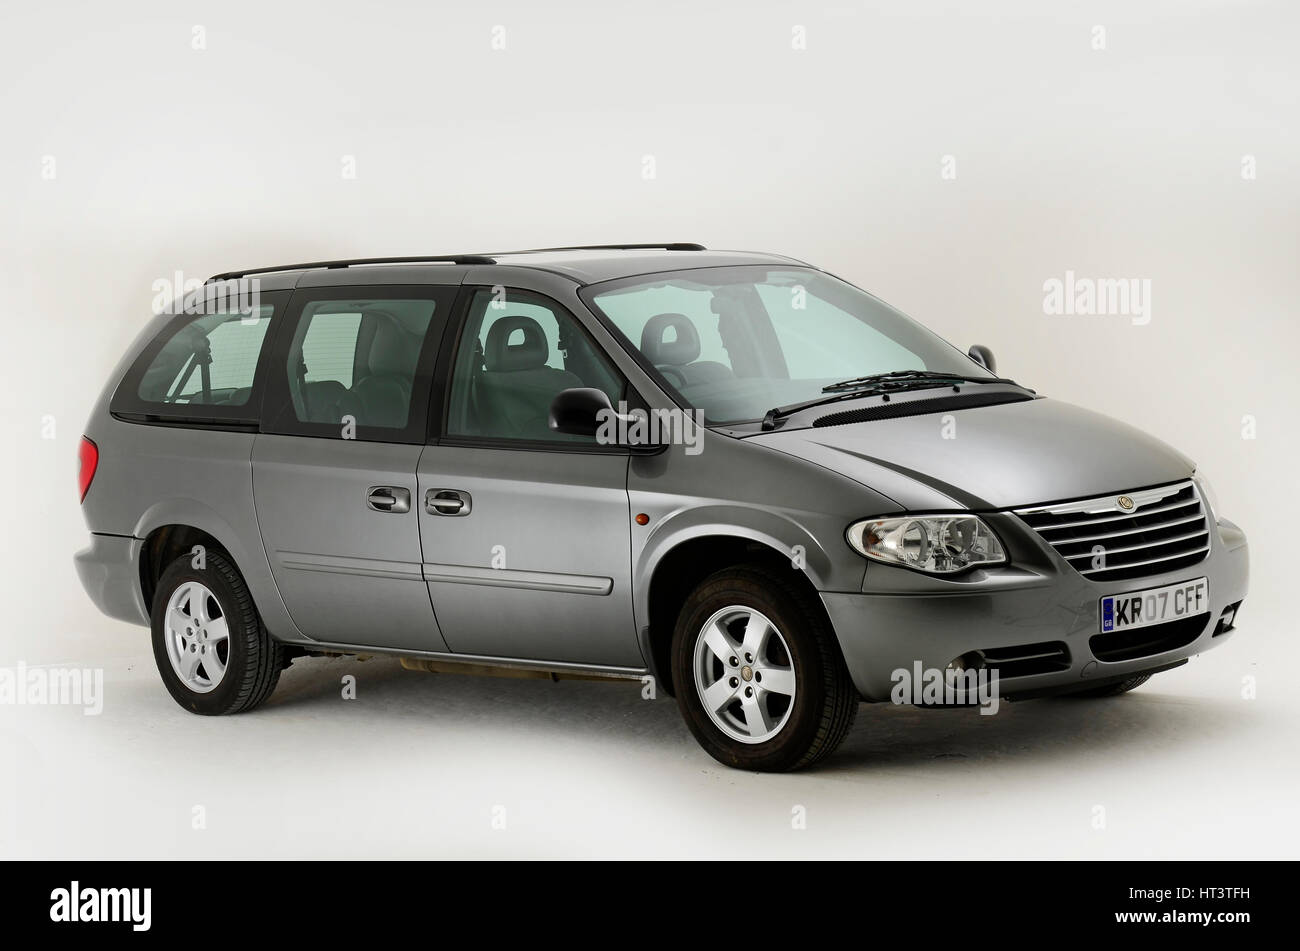 2007 Chrysler Grand Voyager Artist: Unknown. Stock Photo